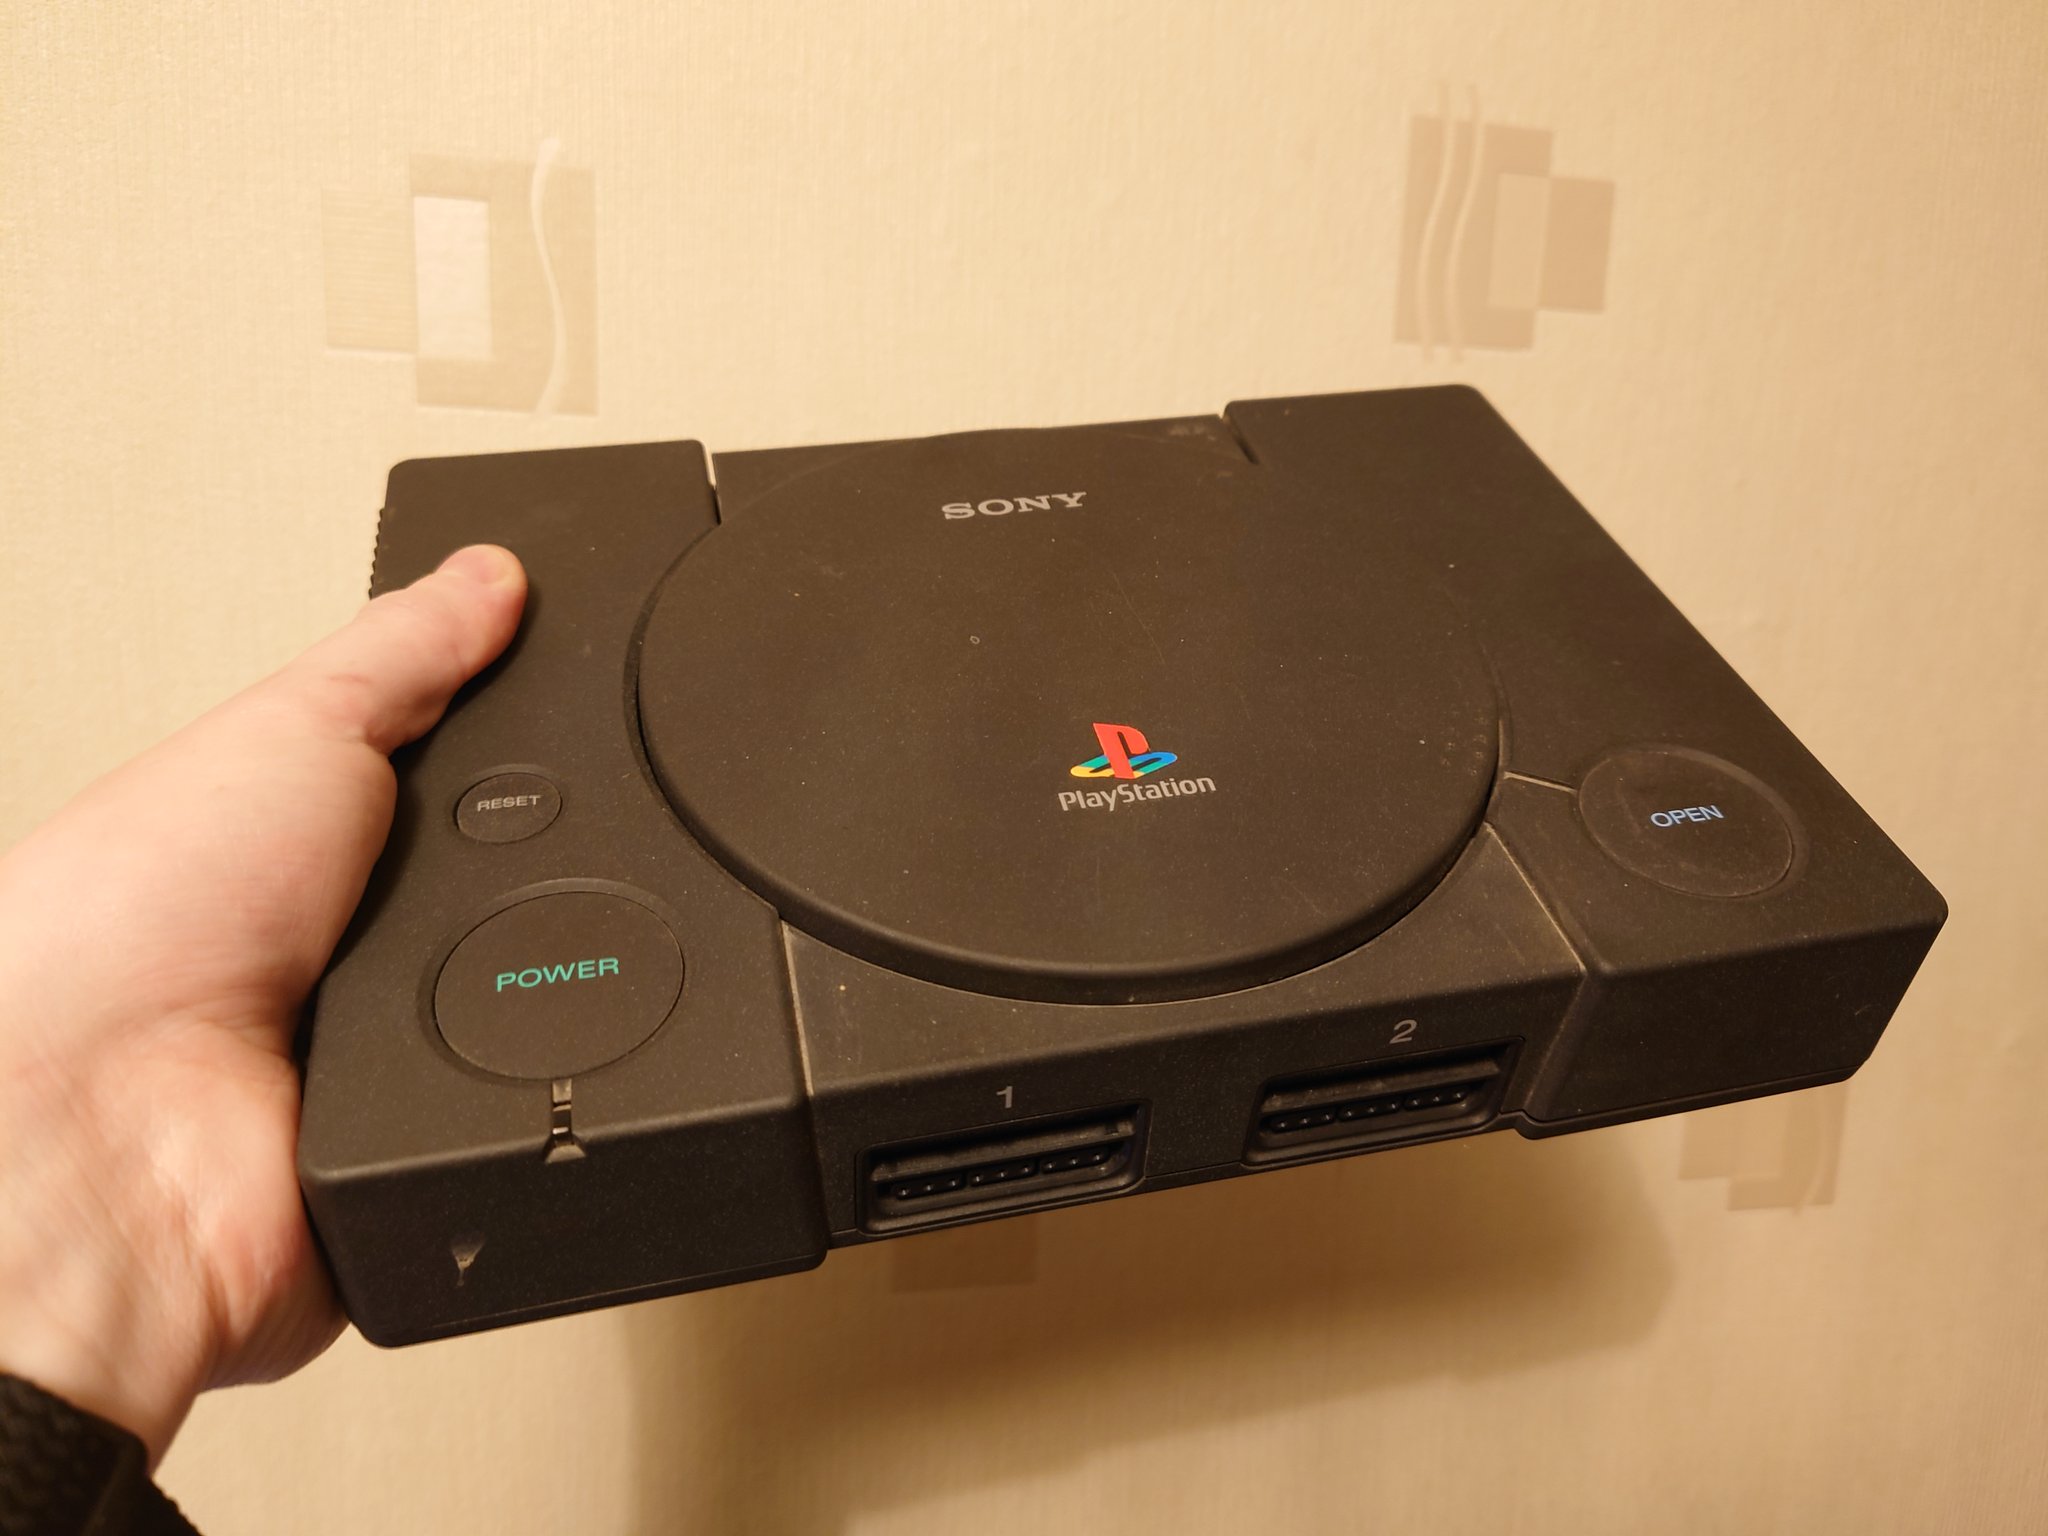 Matt Phillips (bigevilboss@mastodon.gamedev.place) on Twitter: "This is a  Net Yaroze. It was a COMMERCIALLY AVAILABLE (!) PlayStation development kit  for schools and hobbyists, released in 1997, for around $750 American  dollars, or £